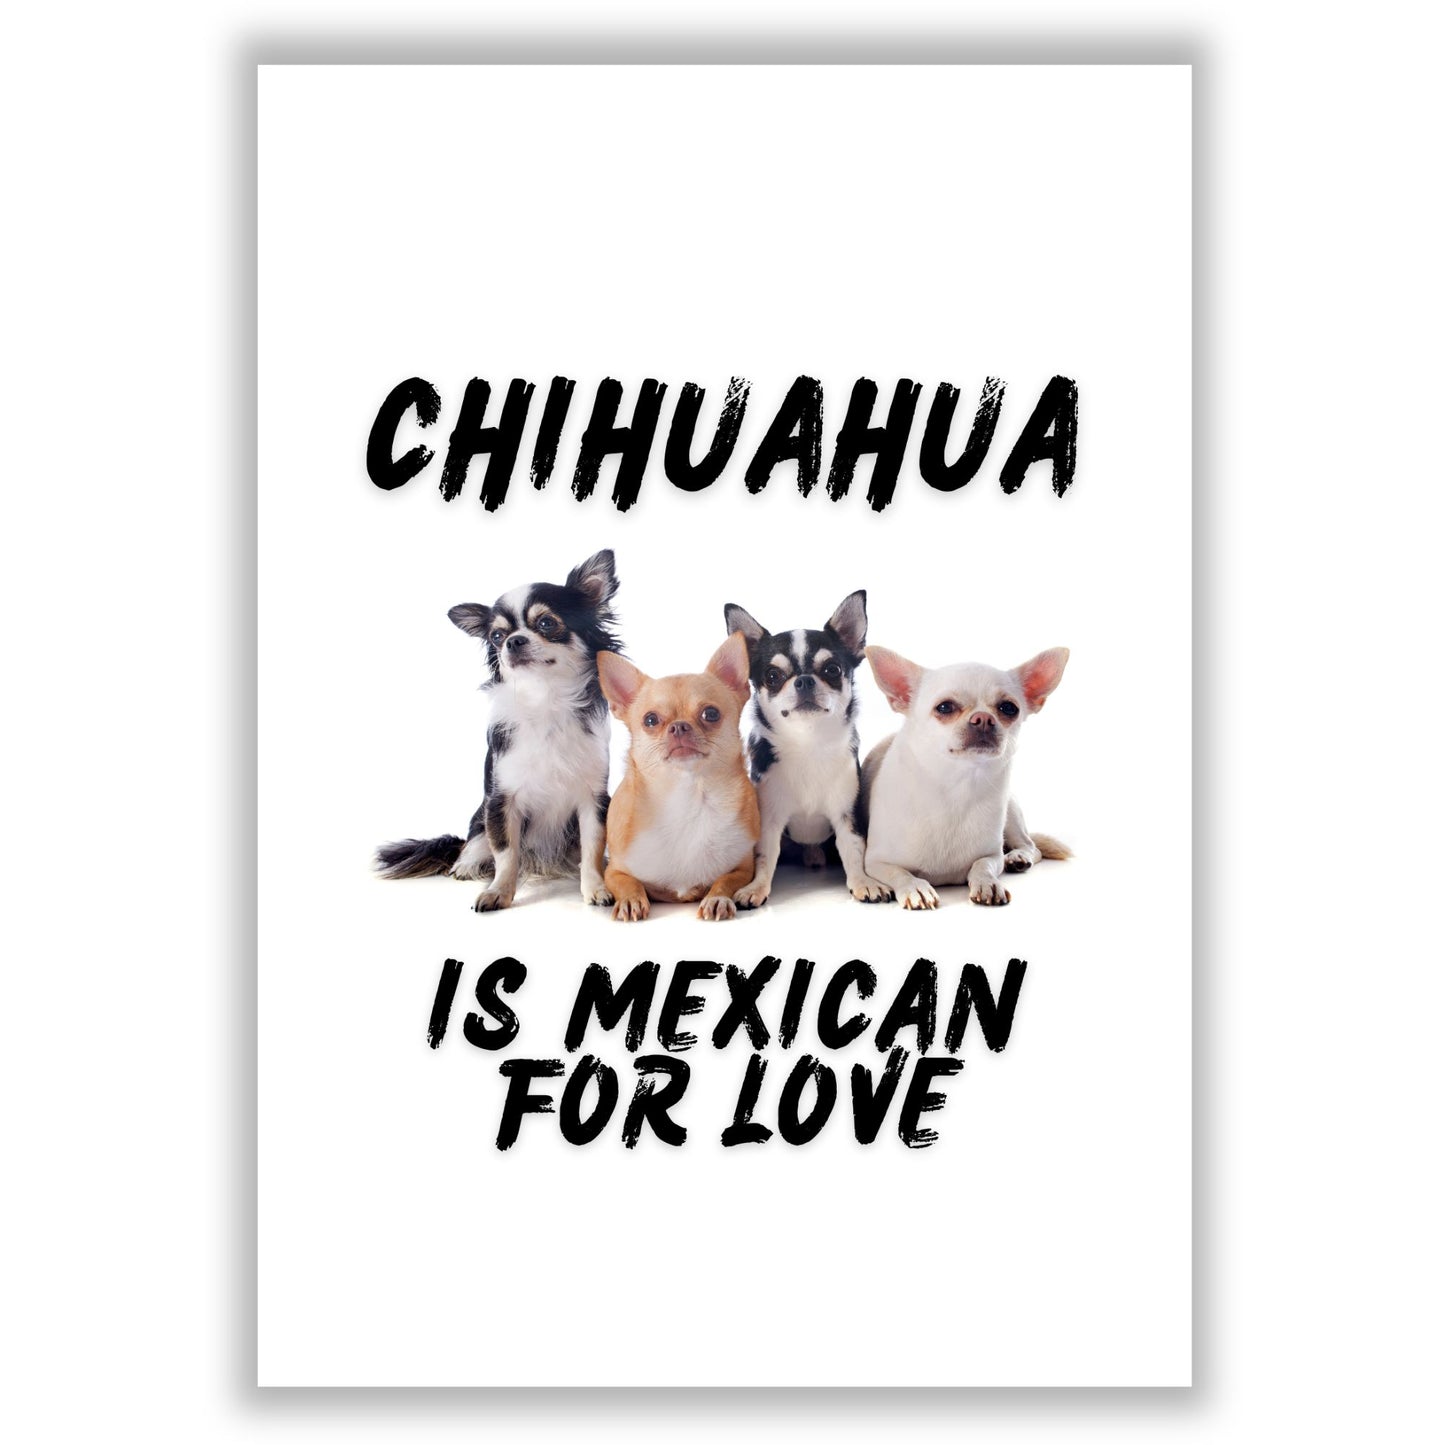 chihuahua-is-mexican-for-love print